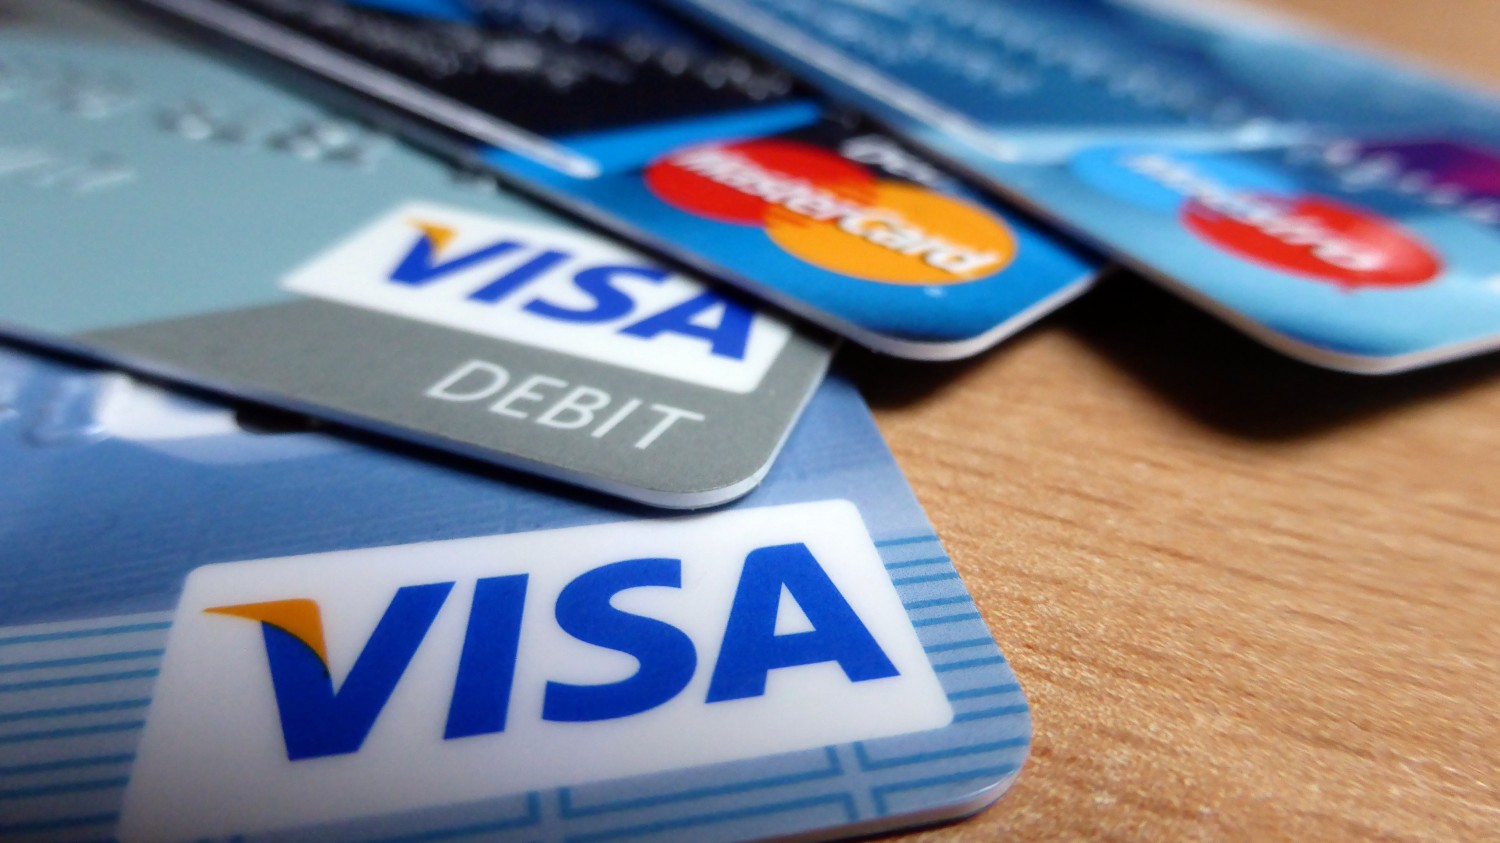 Pay off credit card debt